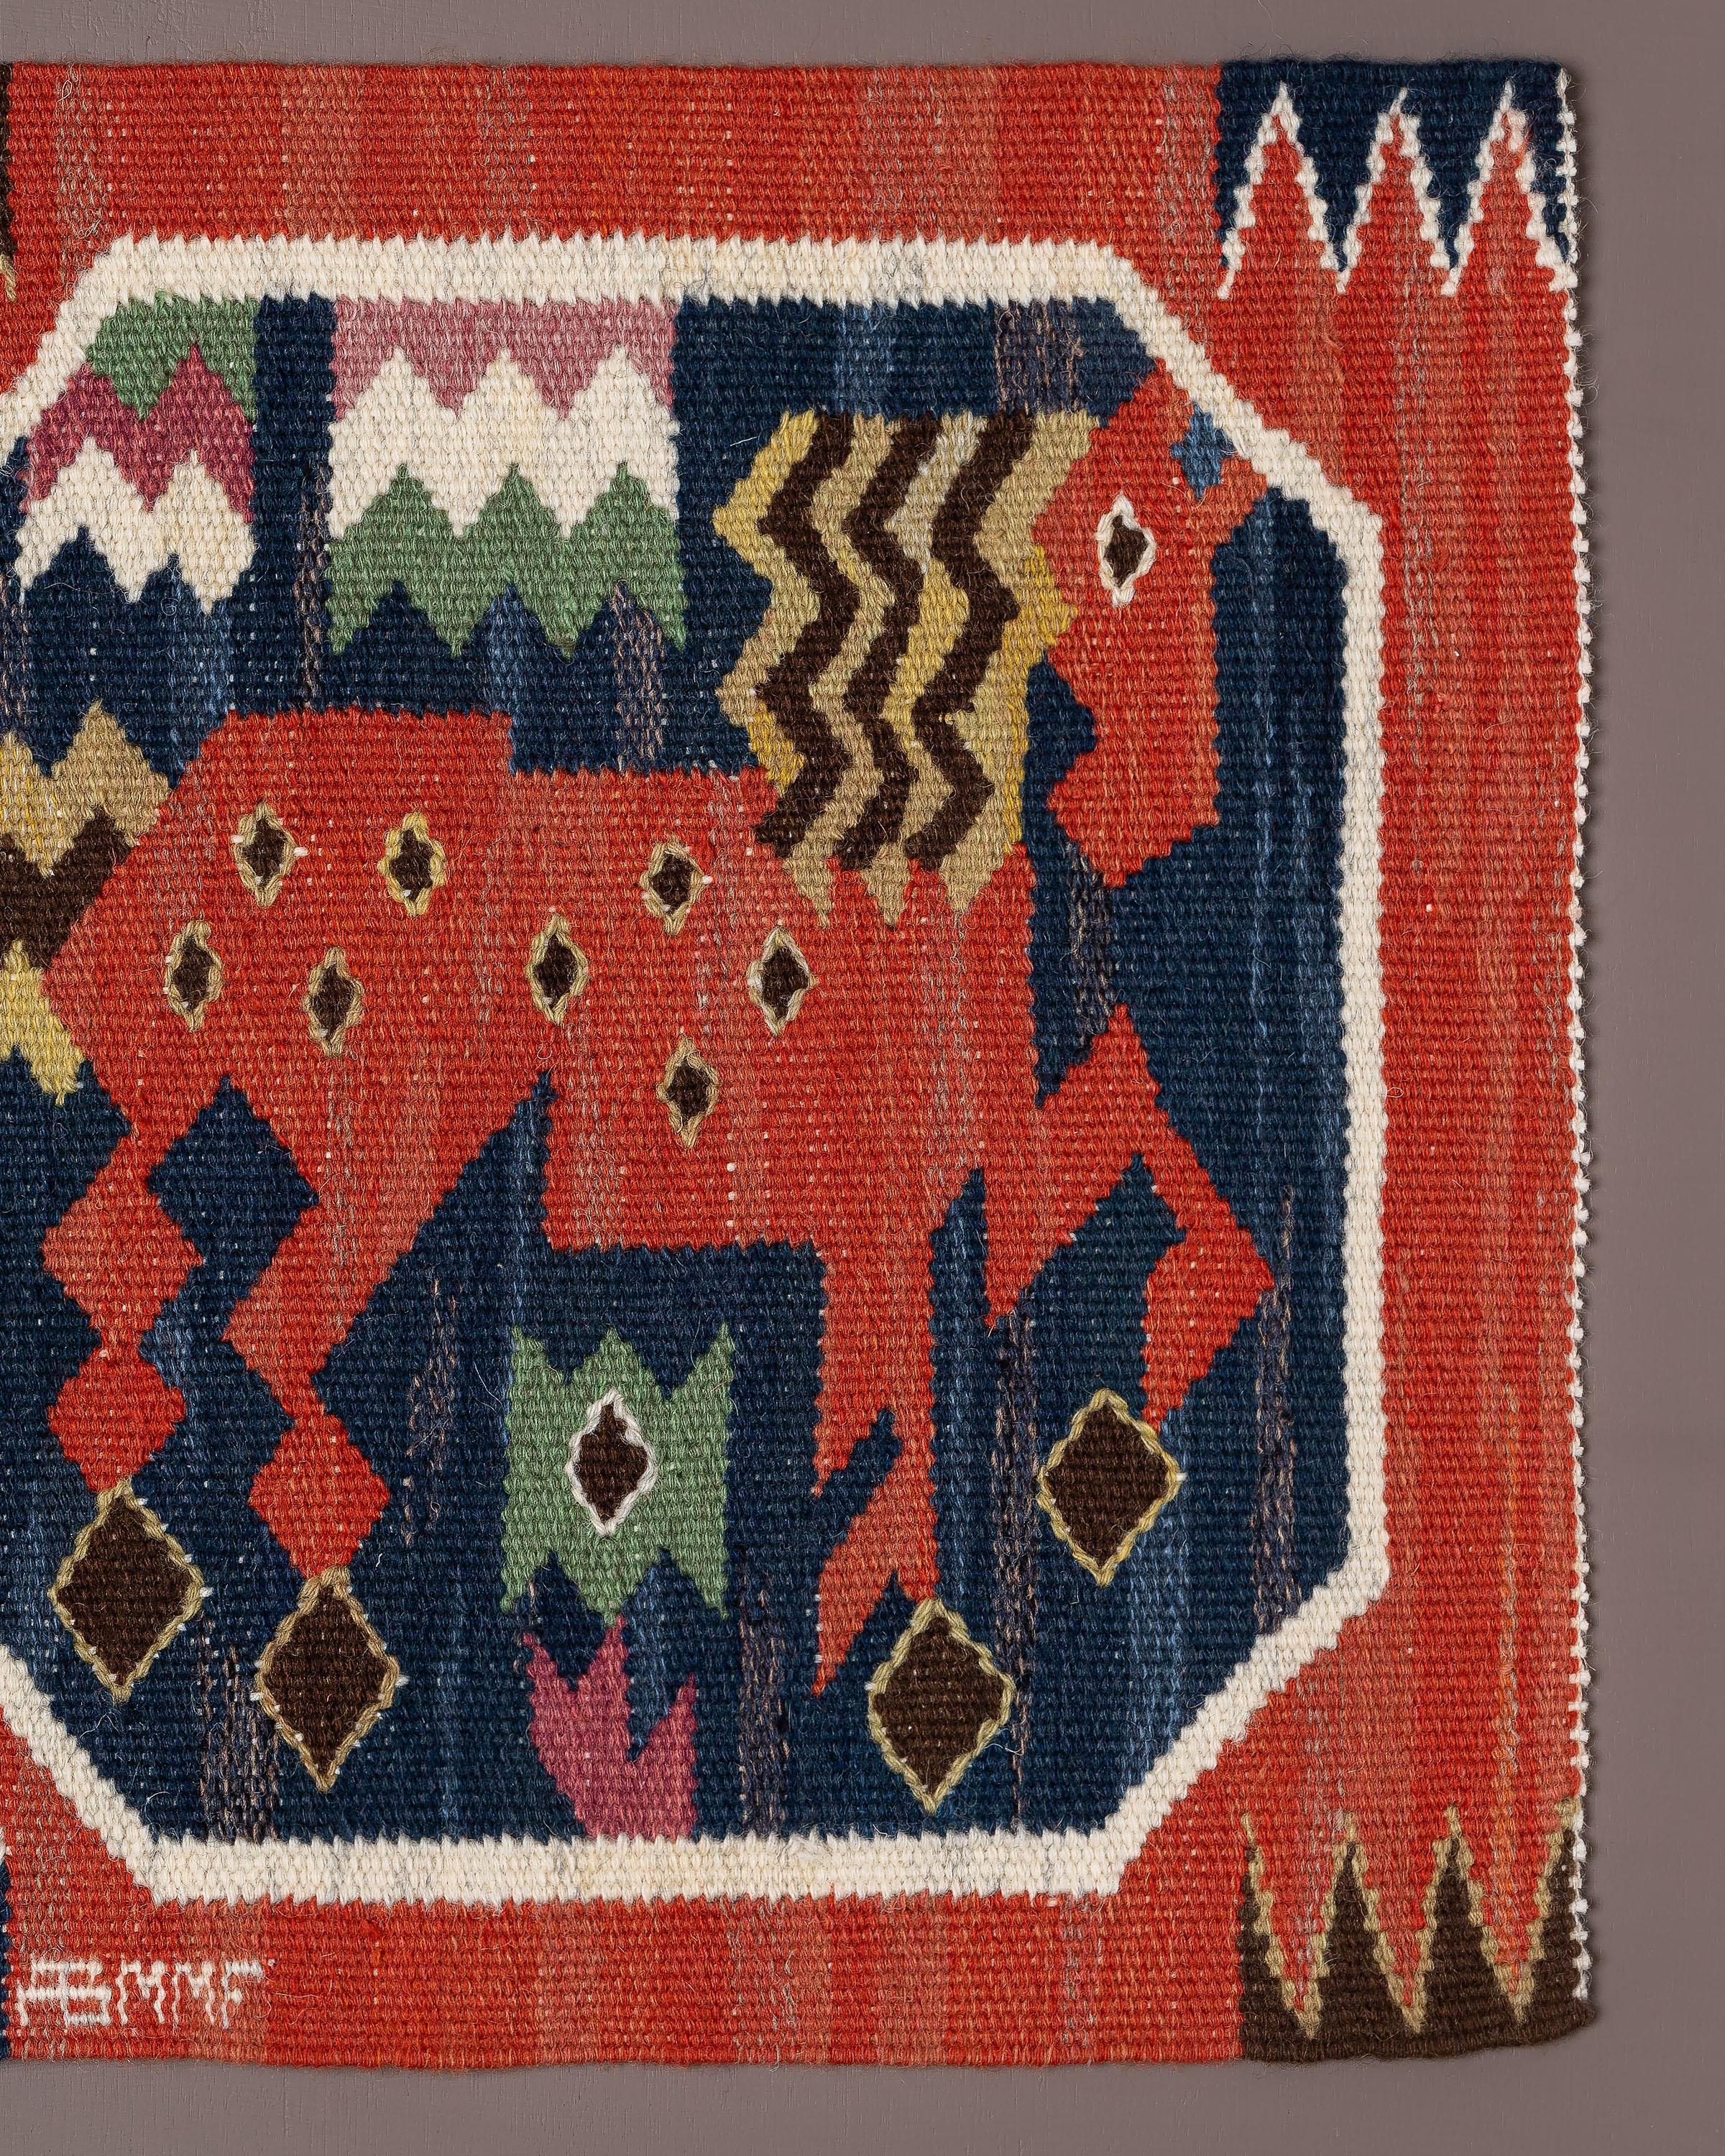 Handwoven tapestry in wool with motif of a red horse, a young stallion, designed by Märta Måås-Fjetterström in 1930. 

Several horses with different poses appears in the collection of red horses by MMF. They are details from the large wall tapestry